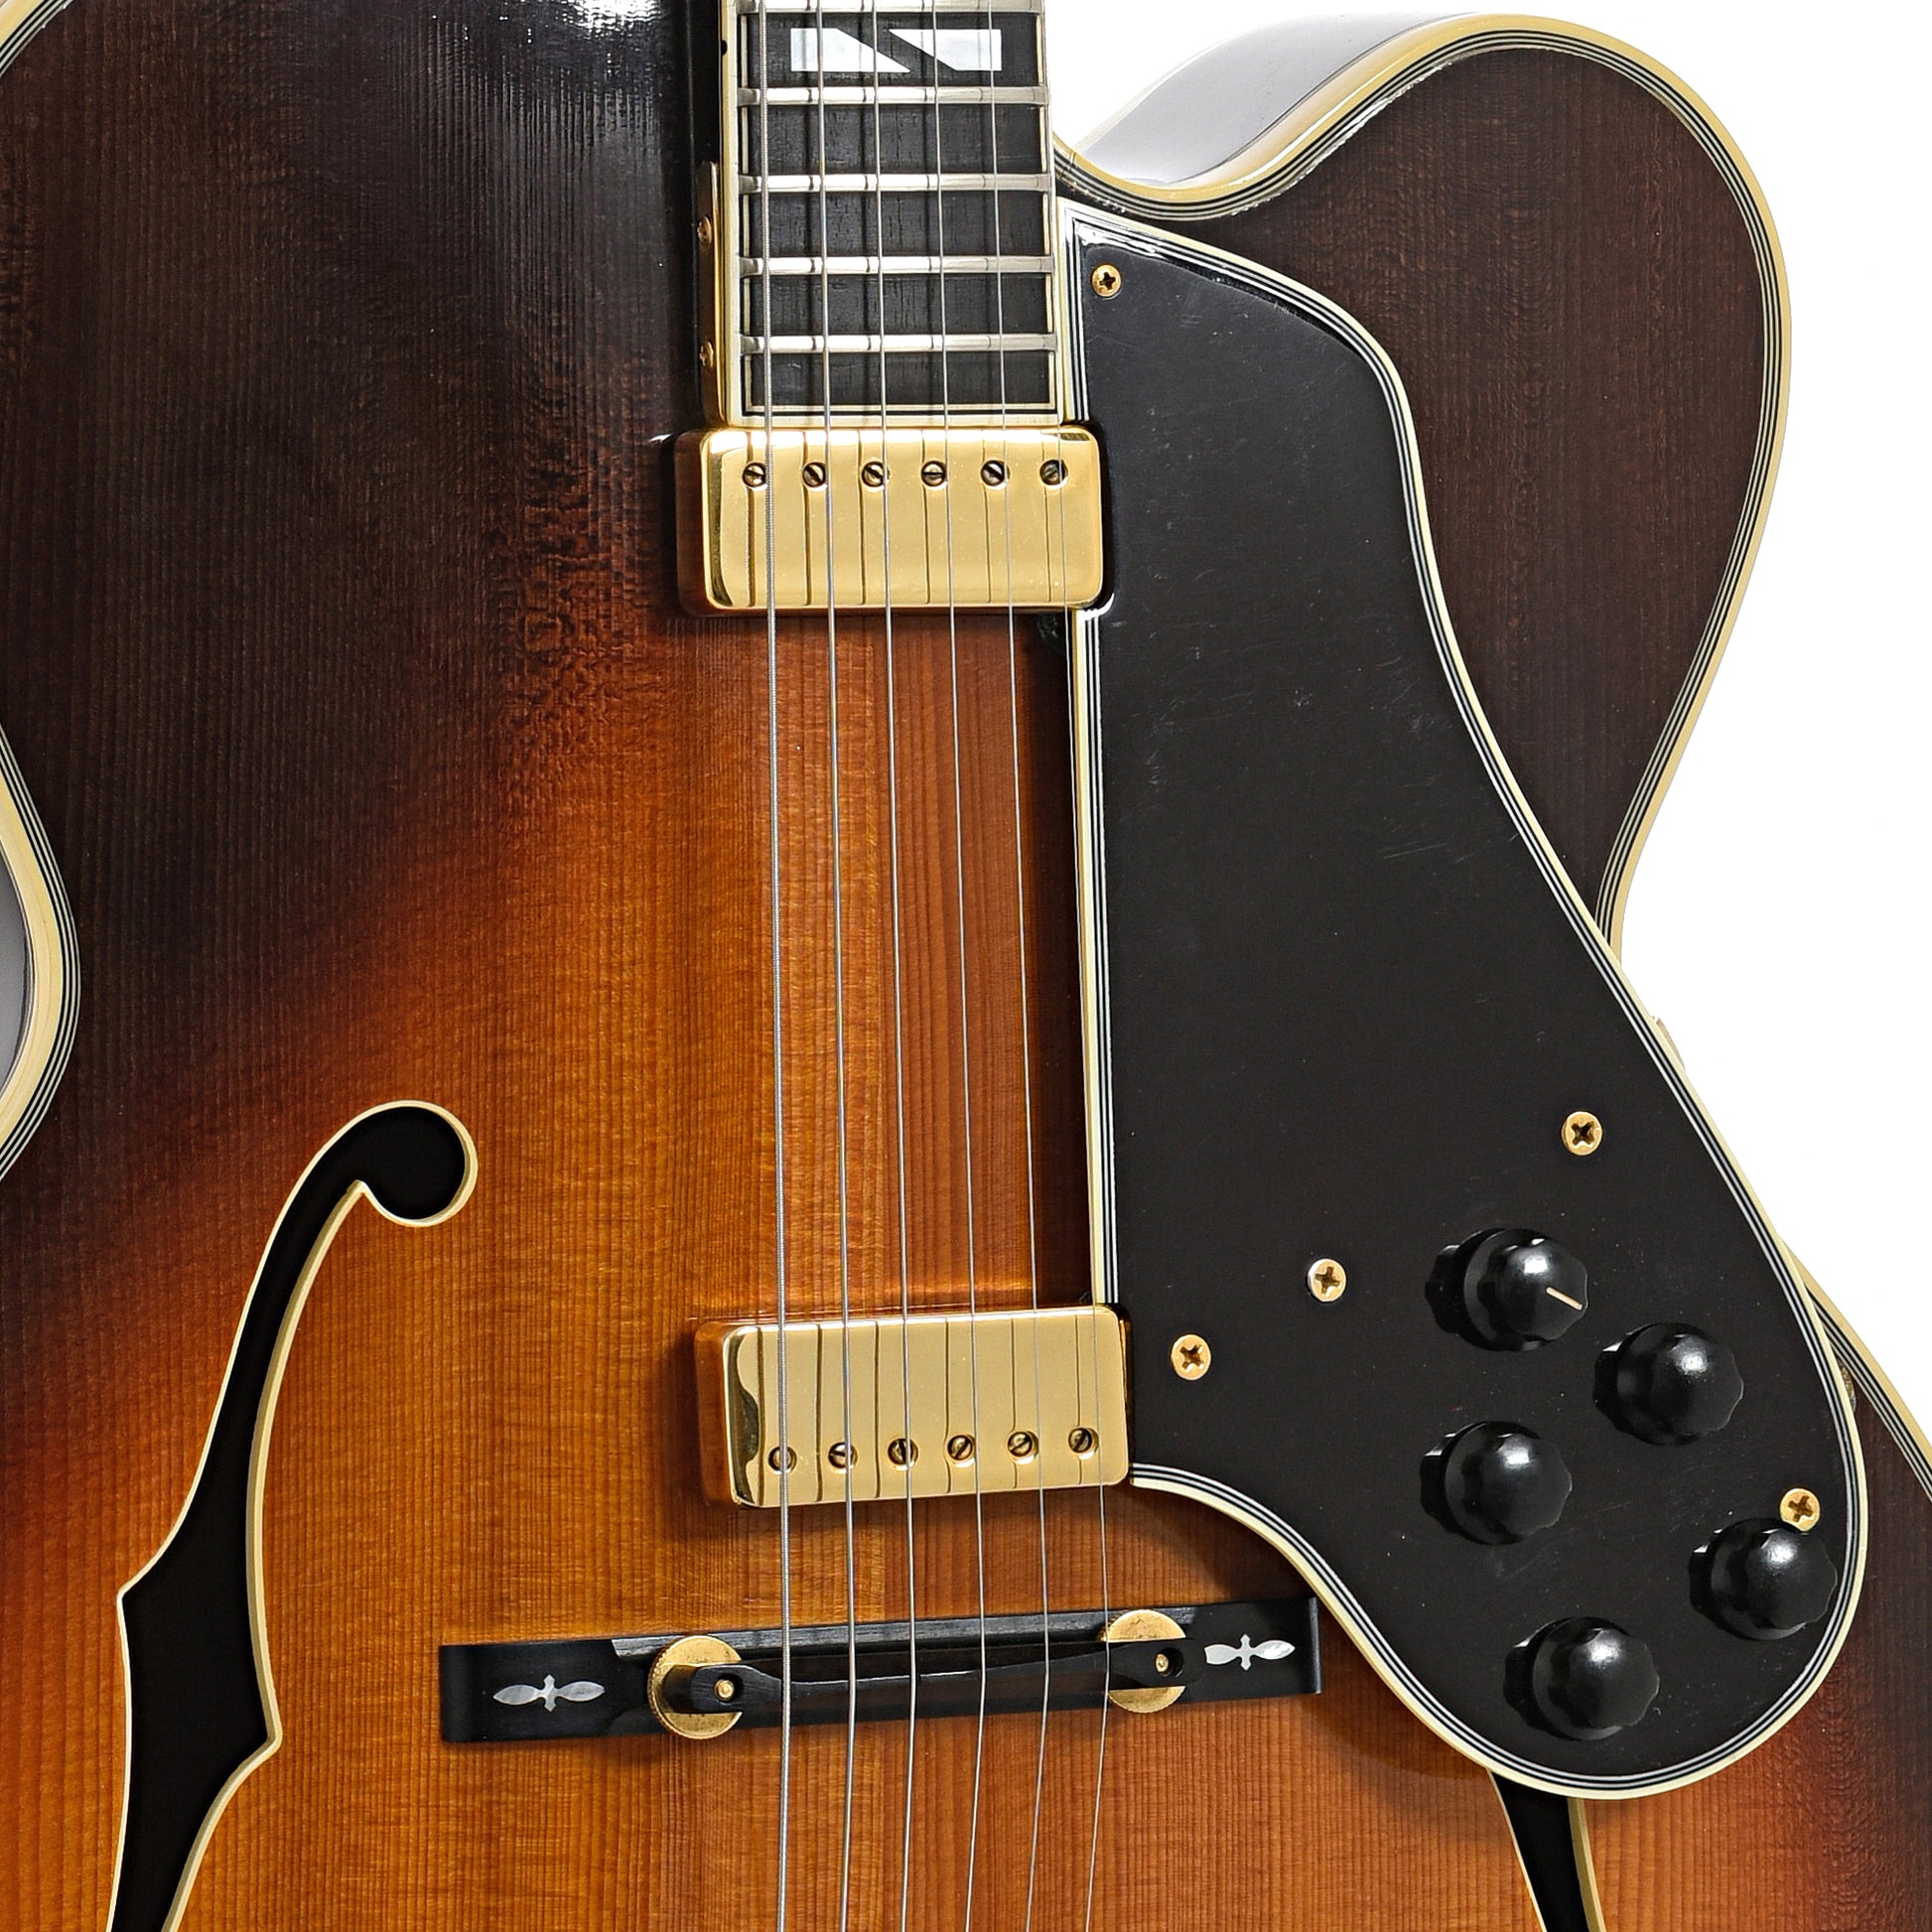 Bridge, pickups and pickguard with controls of Gibson Johnny Smith Archtop Hollowbody Electric Guitar (1974)